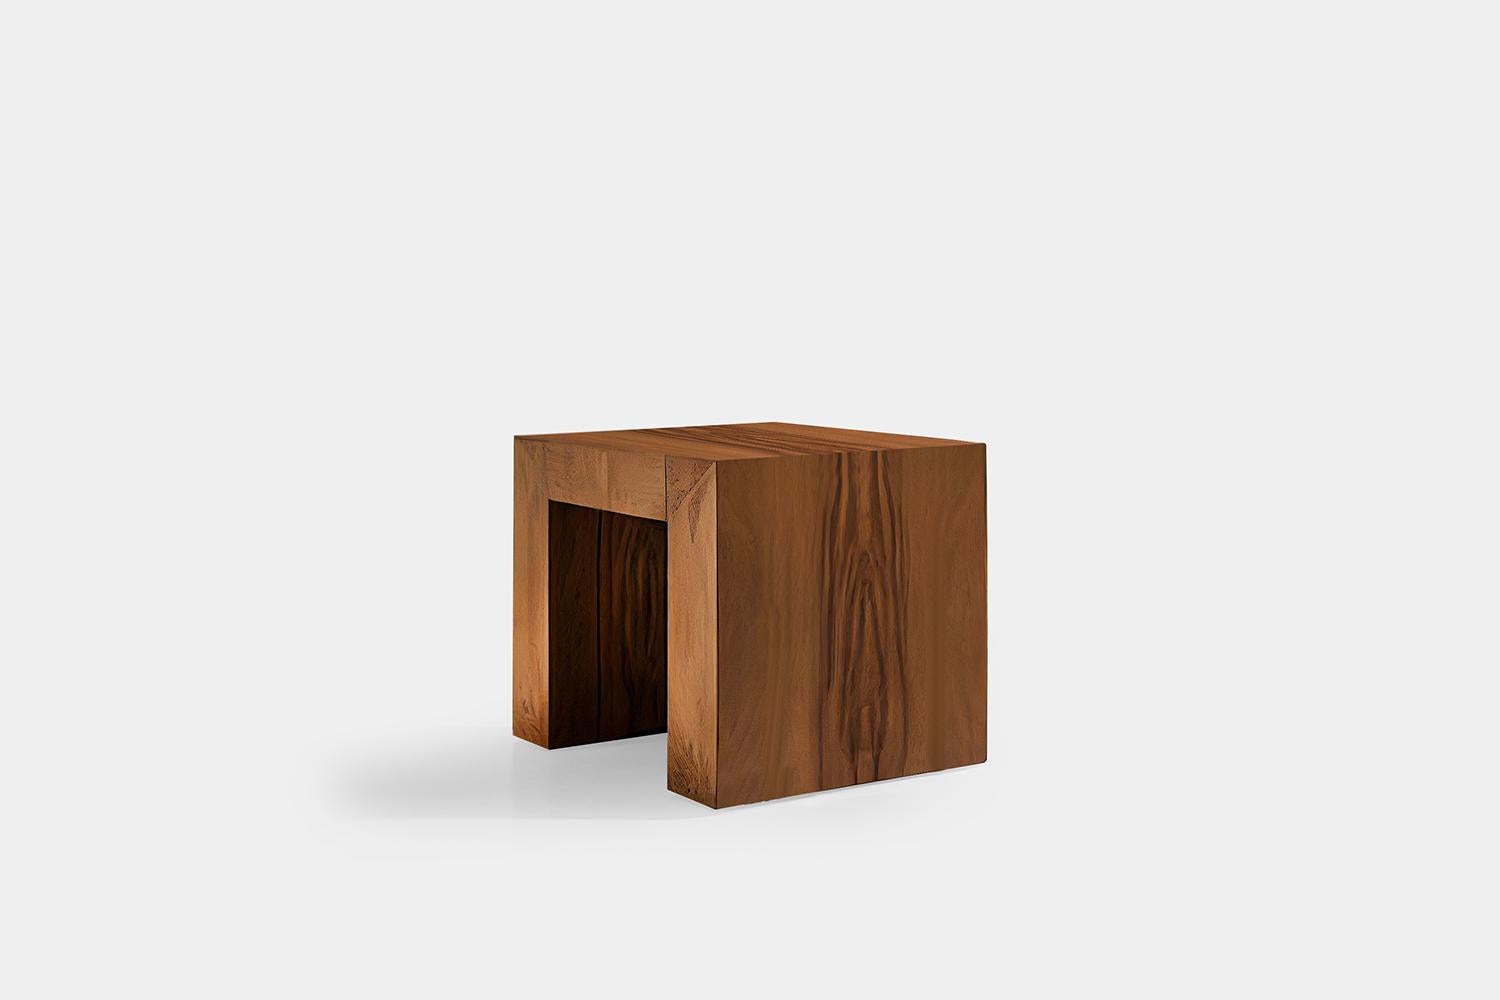 Veneer Brutalist Side Table or Night Stand in Old Wood Finish, Auxiliary Table Elefante For Sale